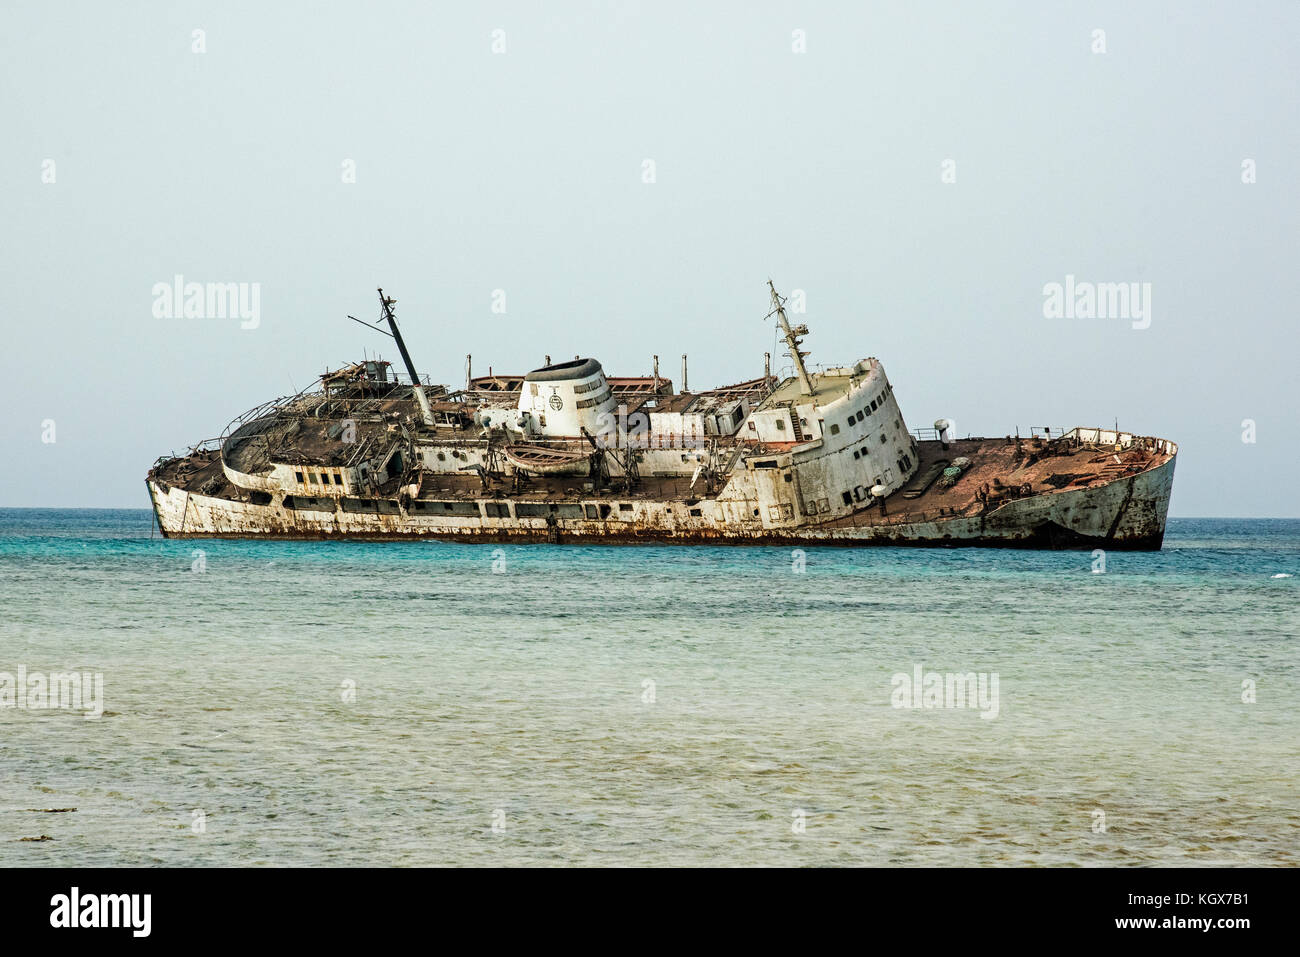 Red Sea shipwreck near Al Qattan beach area, south of Jeddah city, Saudi Arabia. Shoals and shallow water makes boating and swimming forbidden. Stock Photo